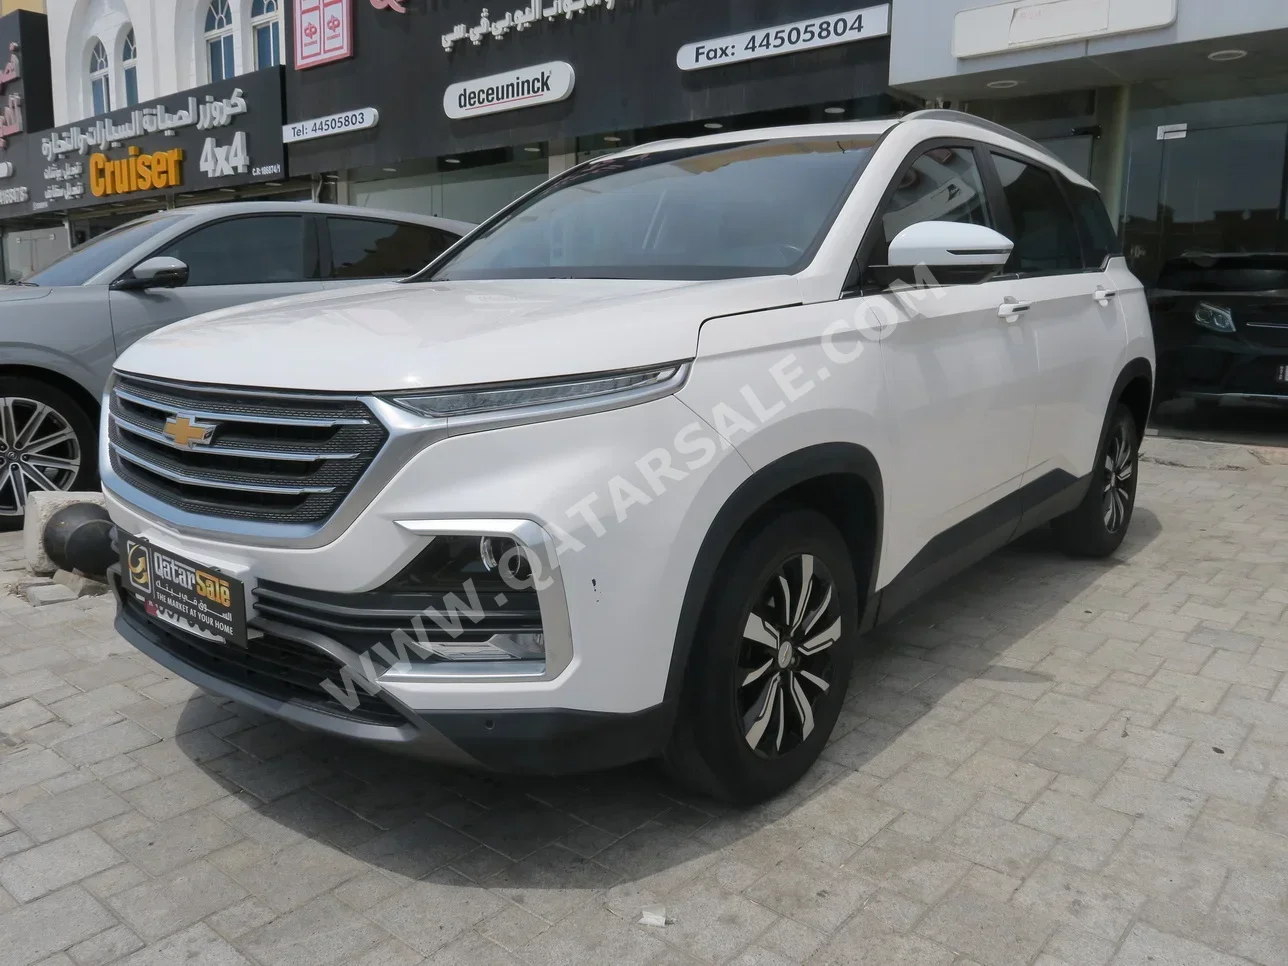 Chevrolet  Captiva  Premier  2021  Automatic  30,000 Km  4 Cylinder  Four Wheel Drive (4WD)  SUV  White  With Warranty